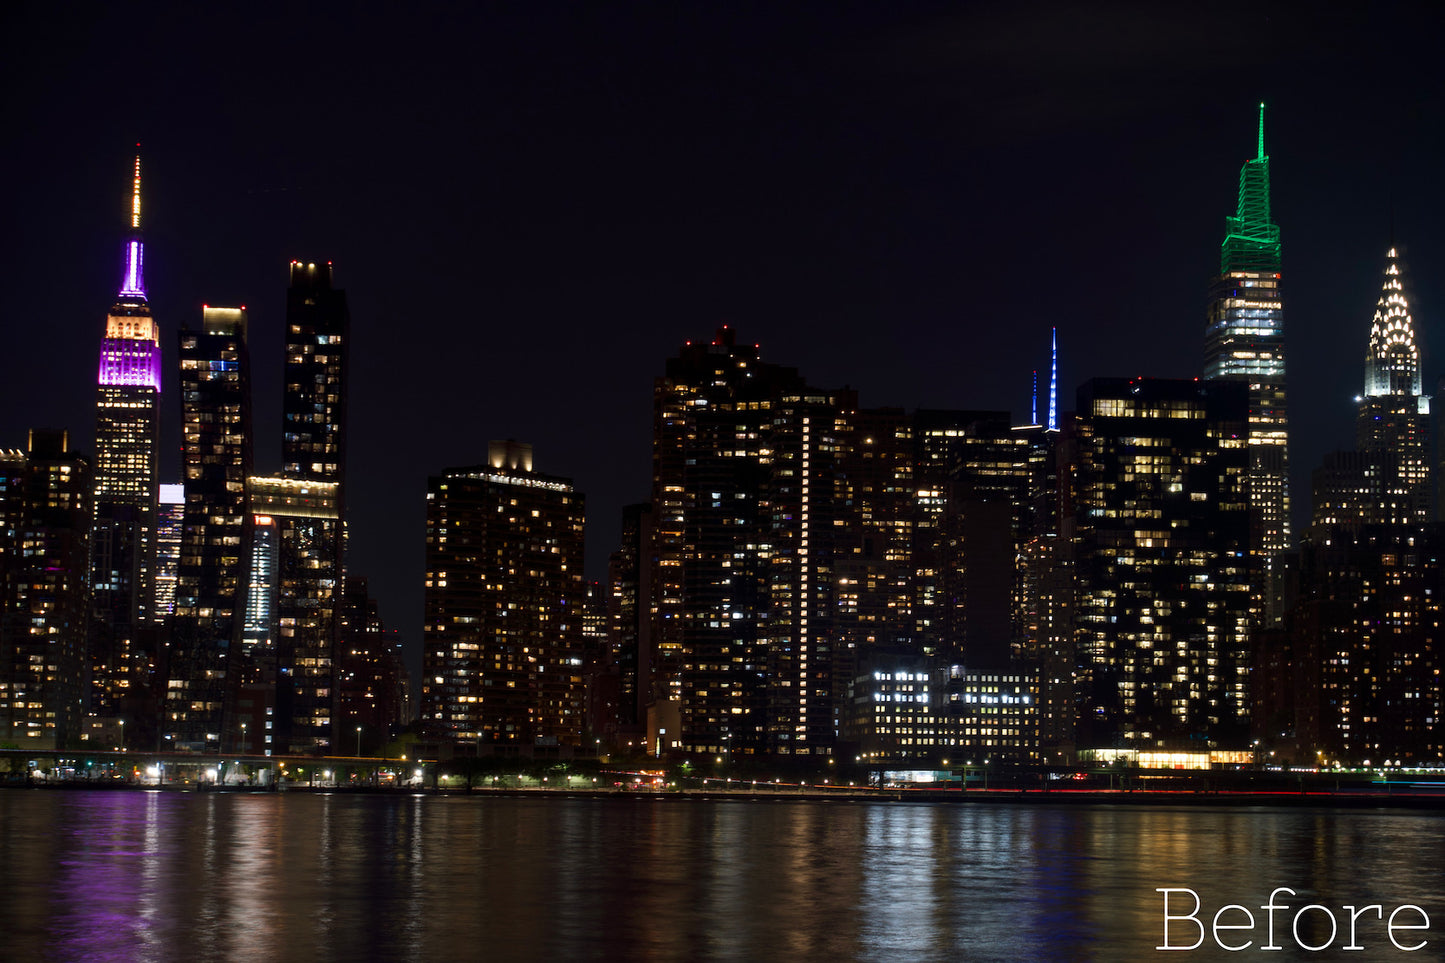 Lightroom Presets Collection 01 "City Nights"